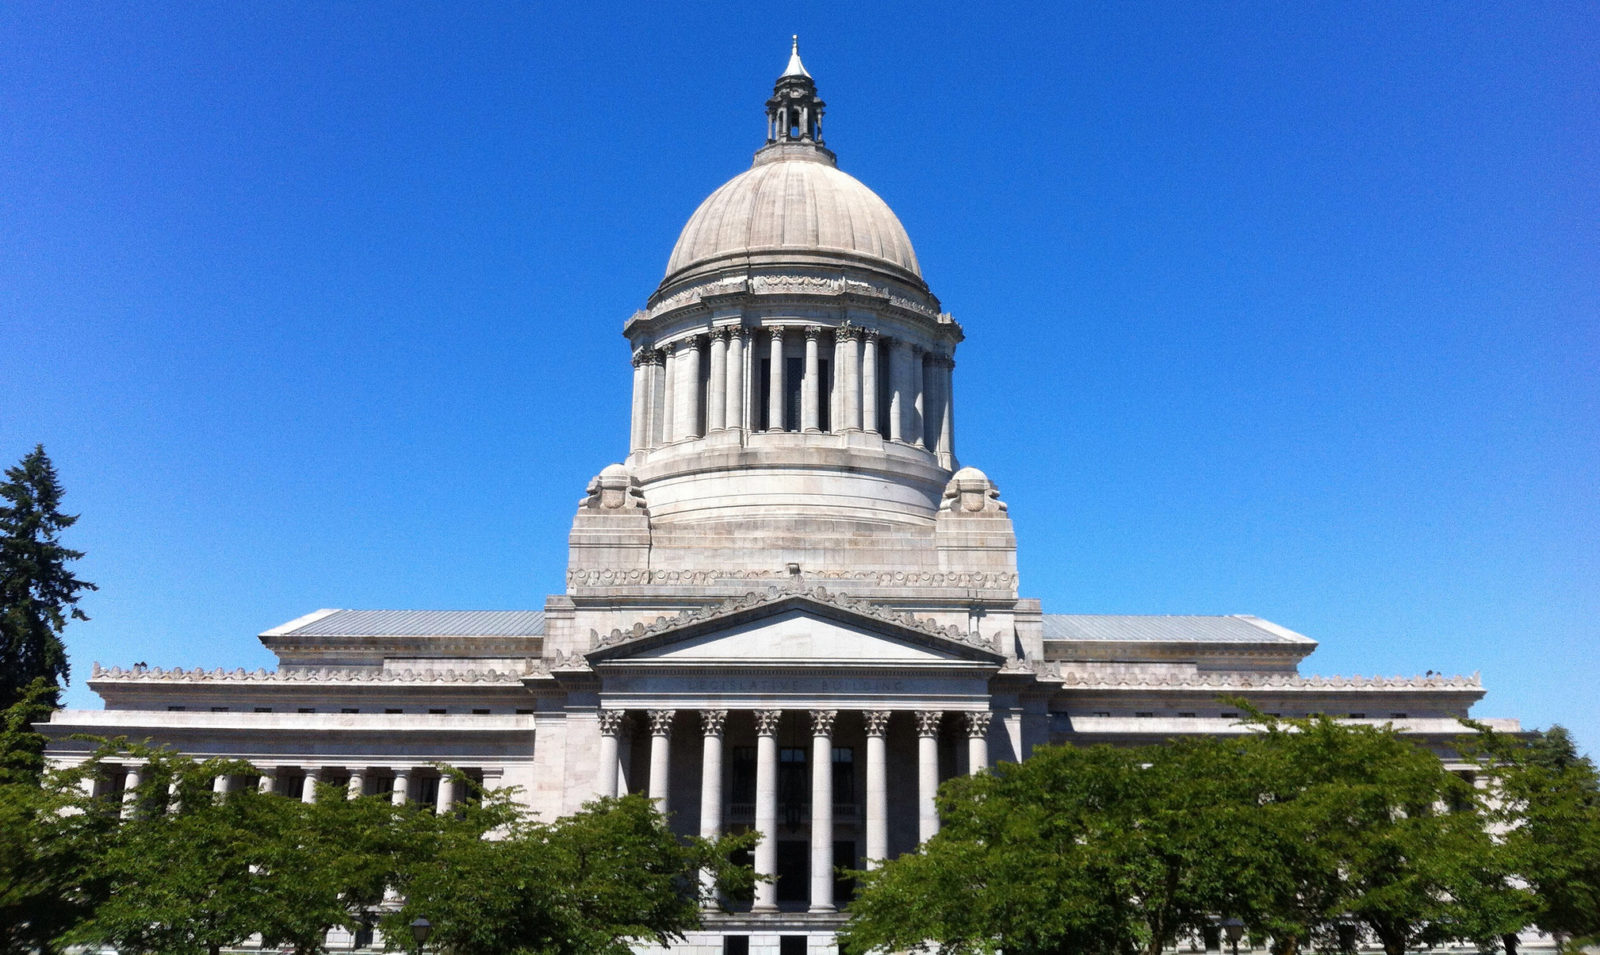 Photo of domed Legislative Building at the Washington State Capitol campus in Olympia.